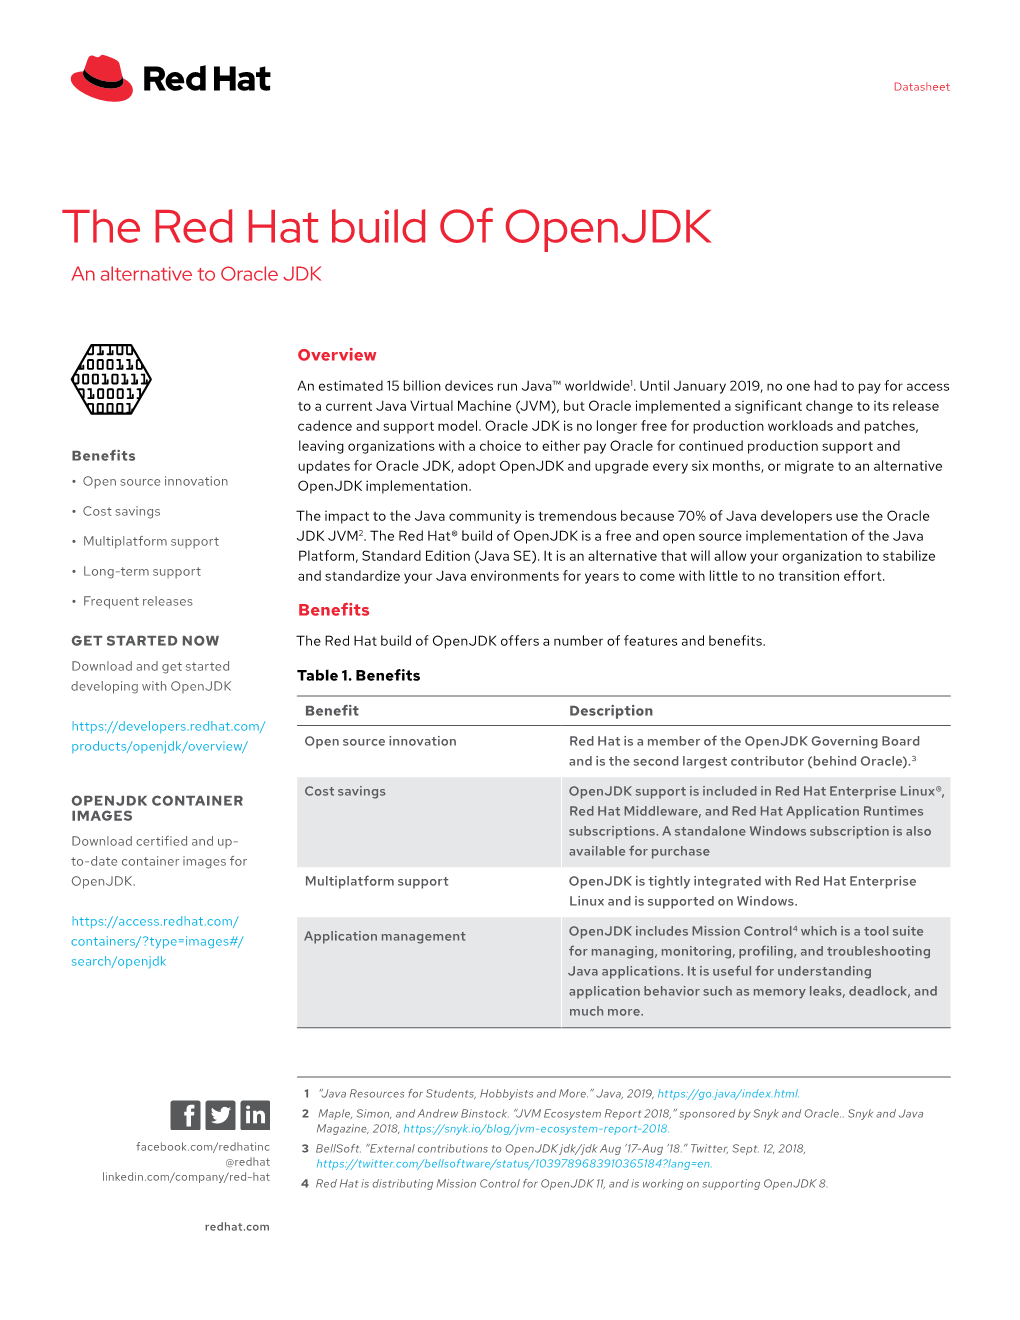 The Red Hat Build of Openjdk an Alternative to Oracle JDK